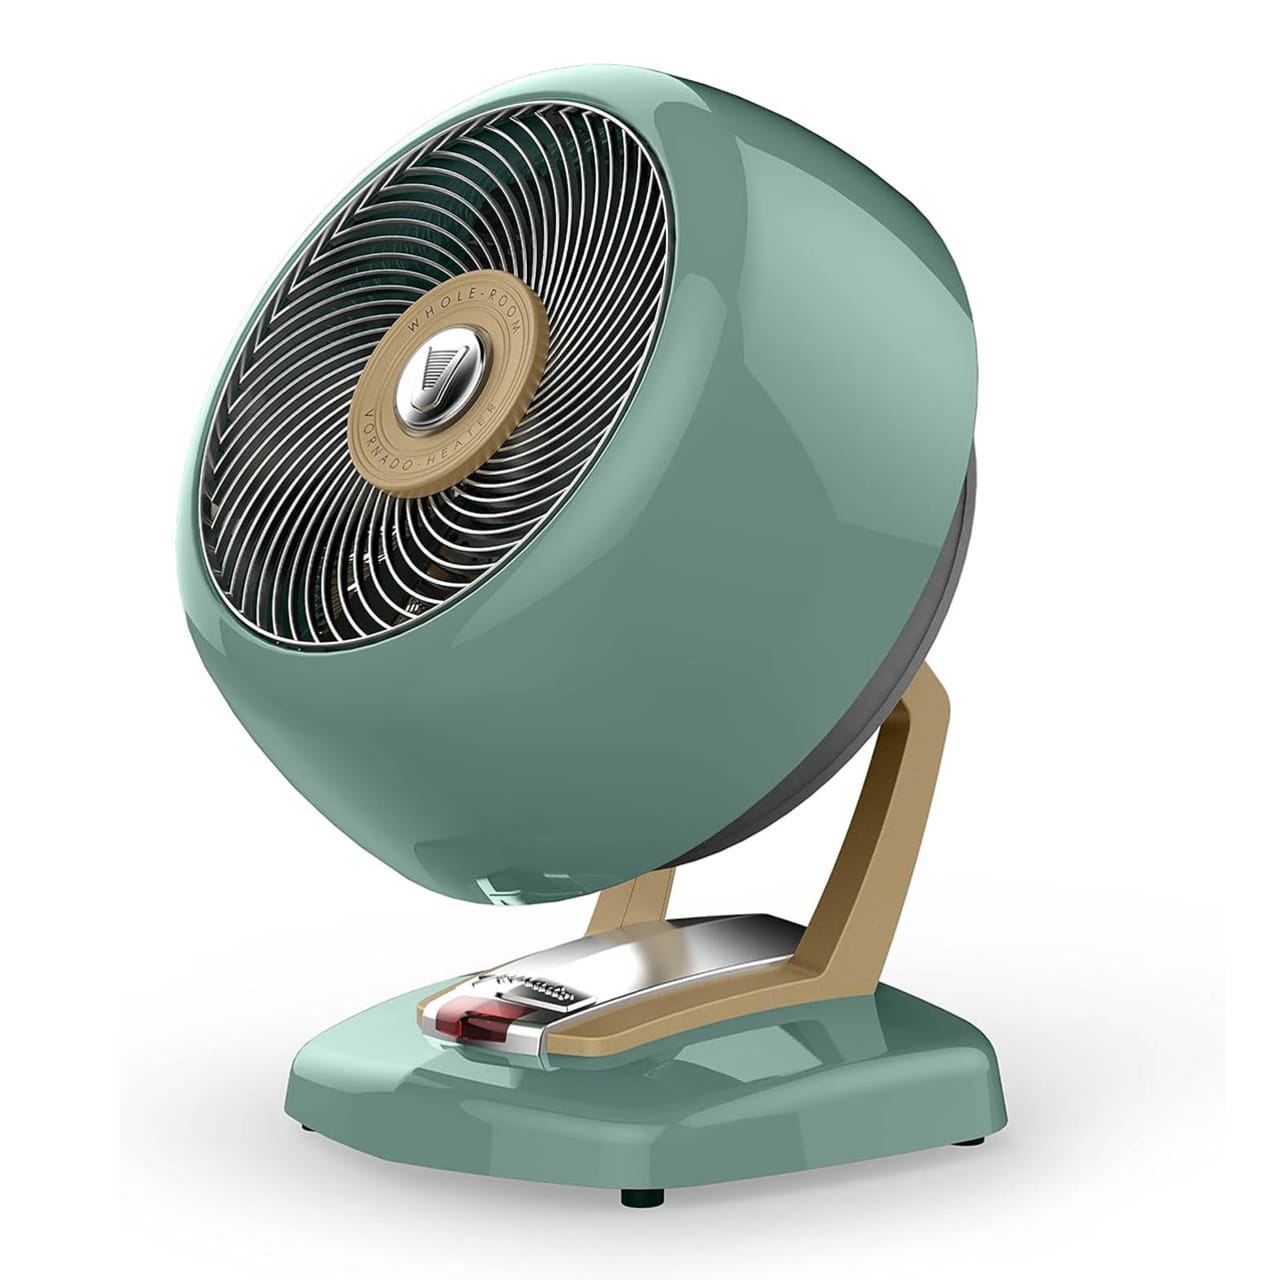 Blower heater price and performance analysis? Here are top 8 picks